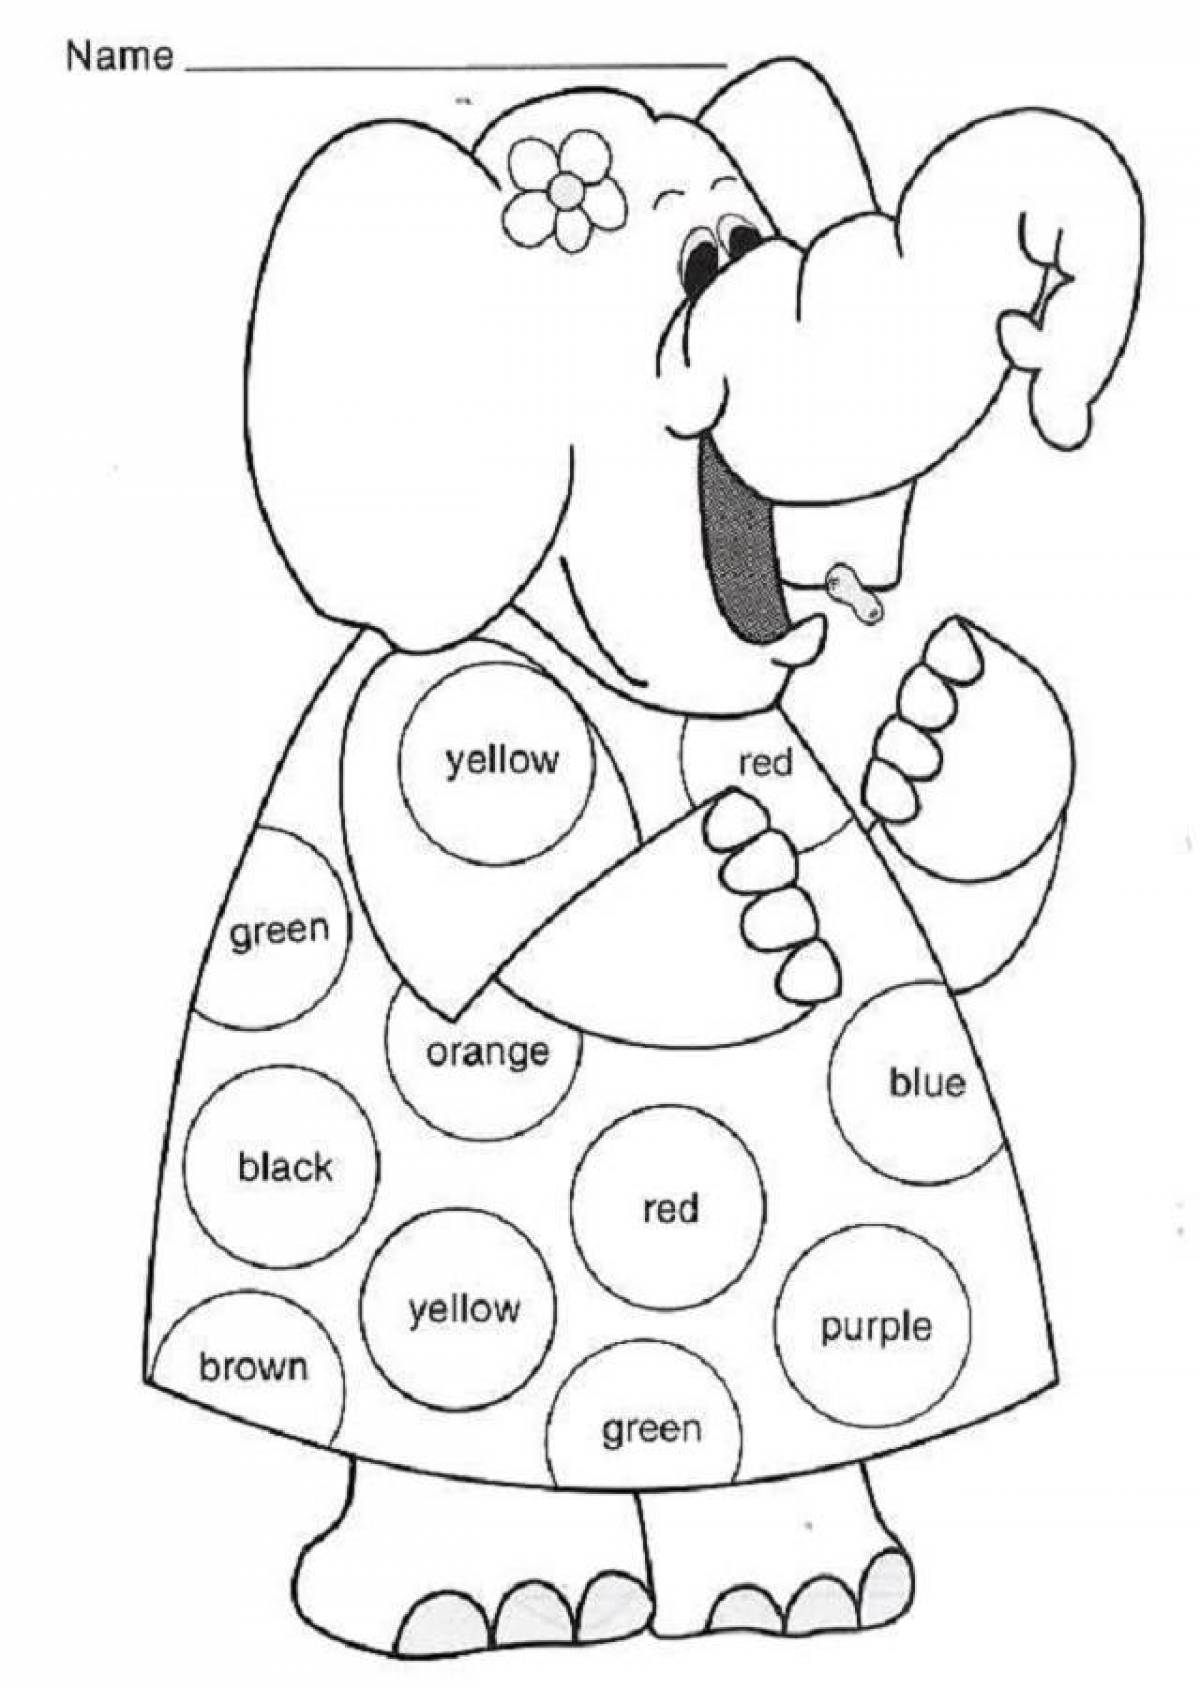 Fun coloring for students